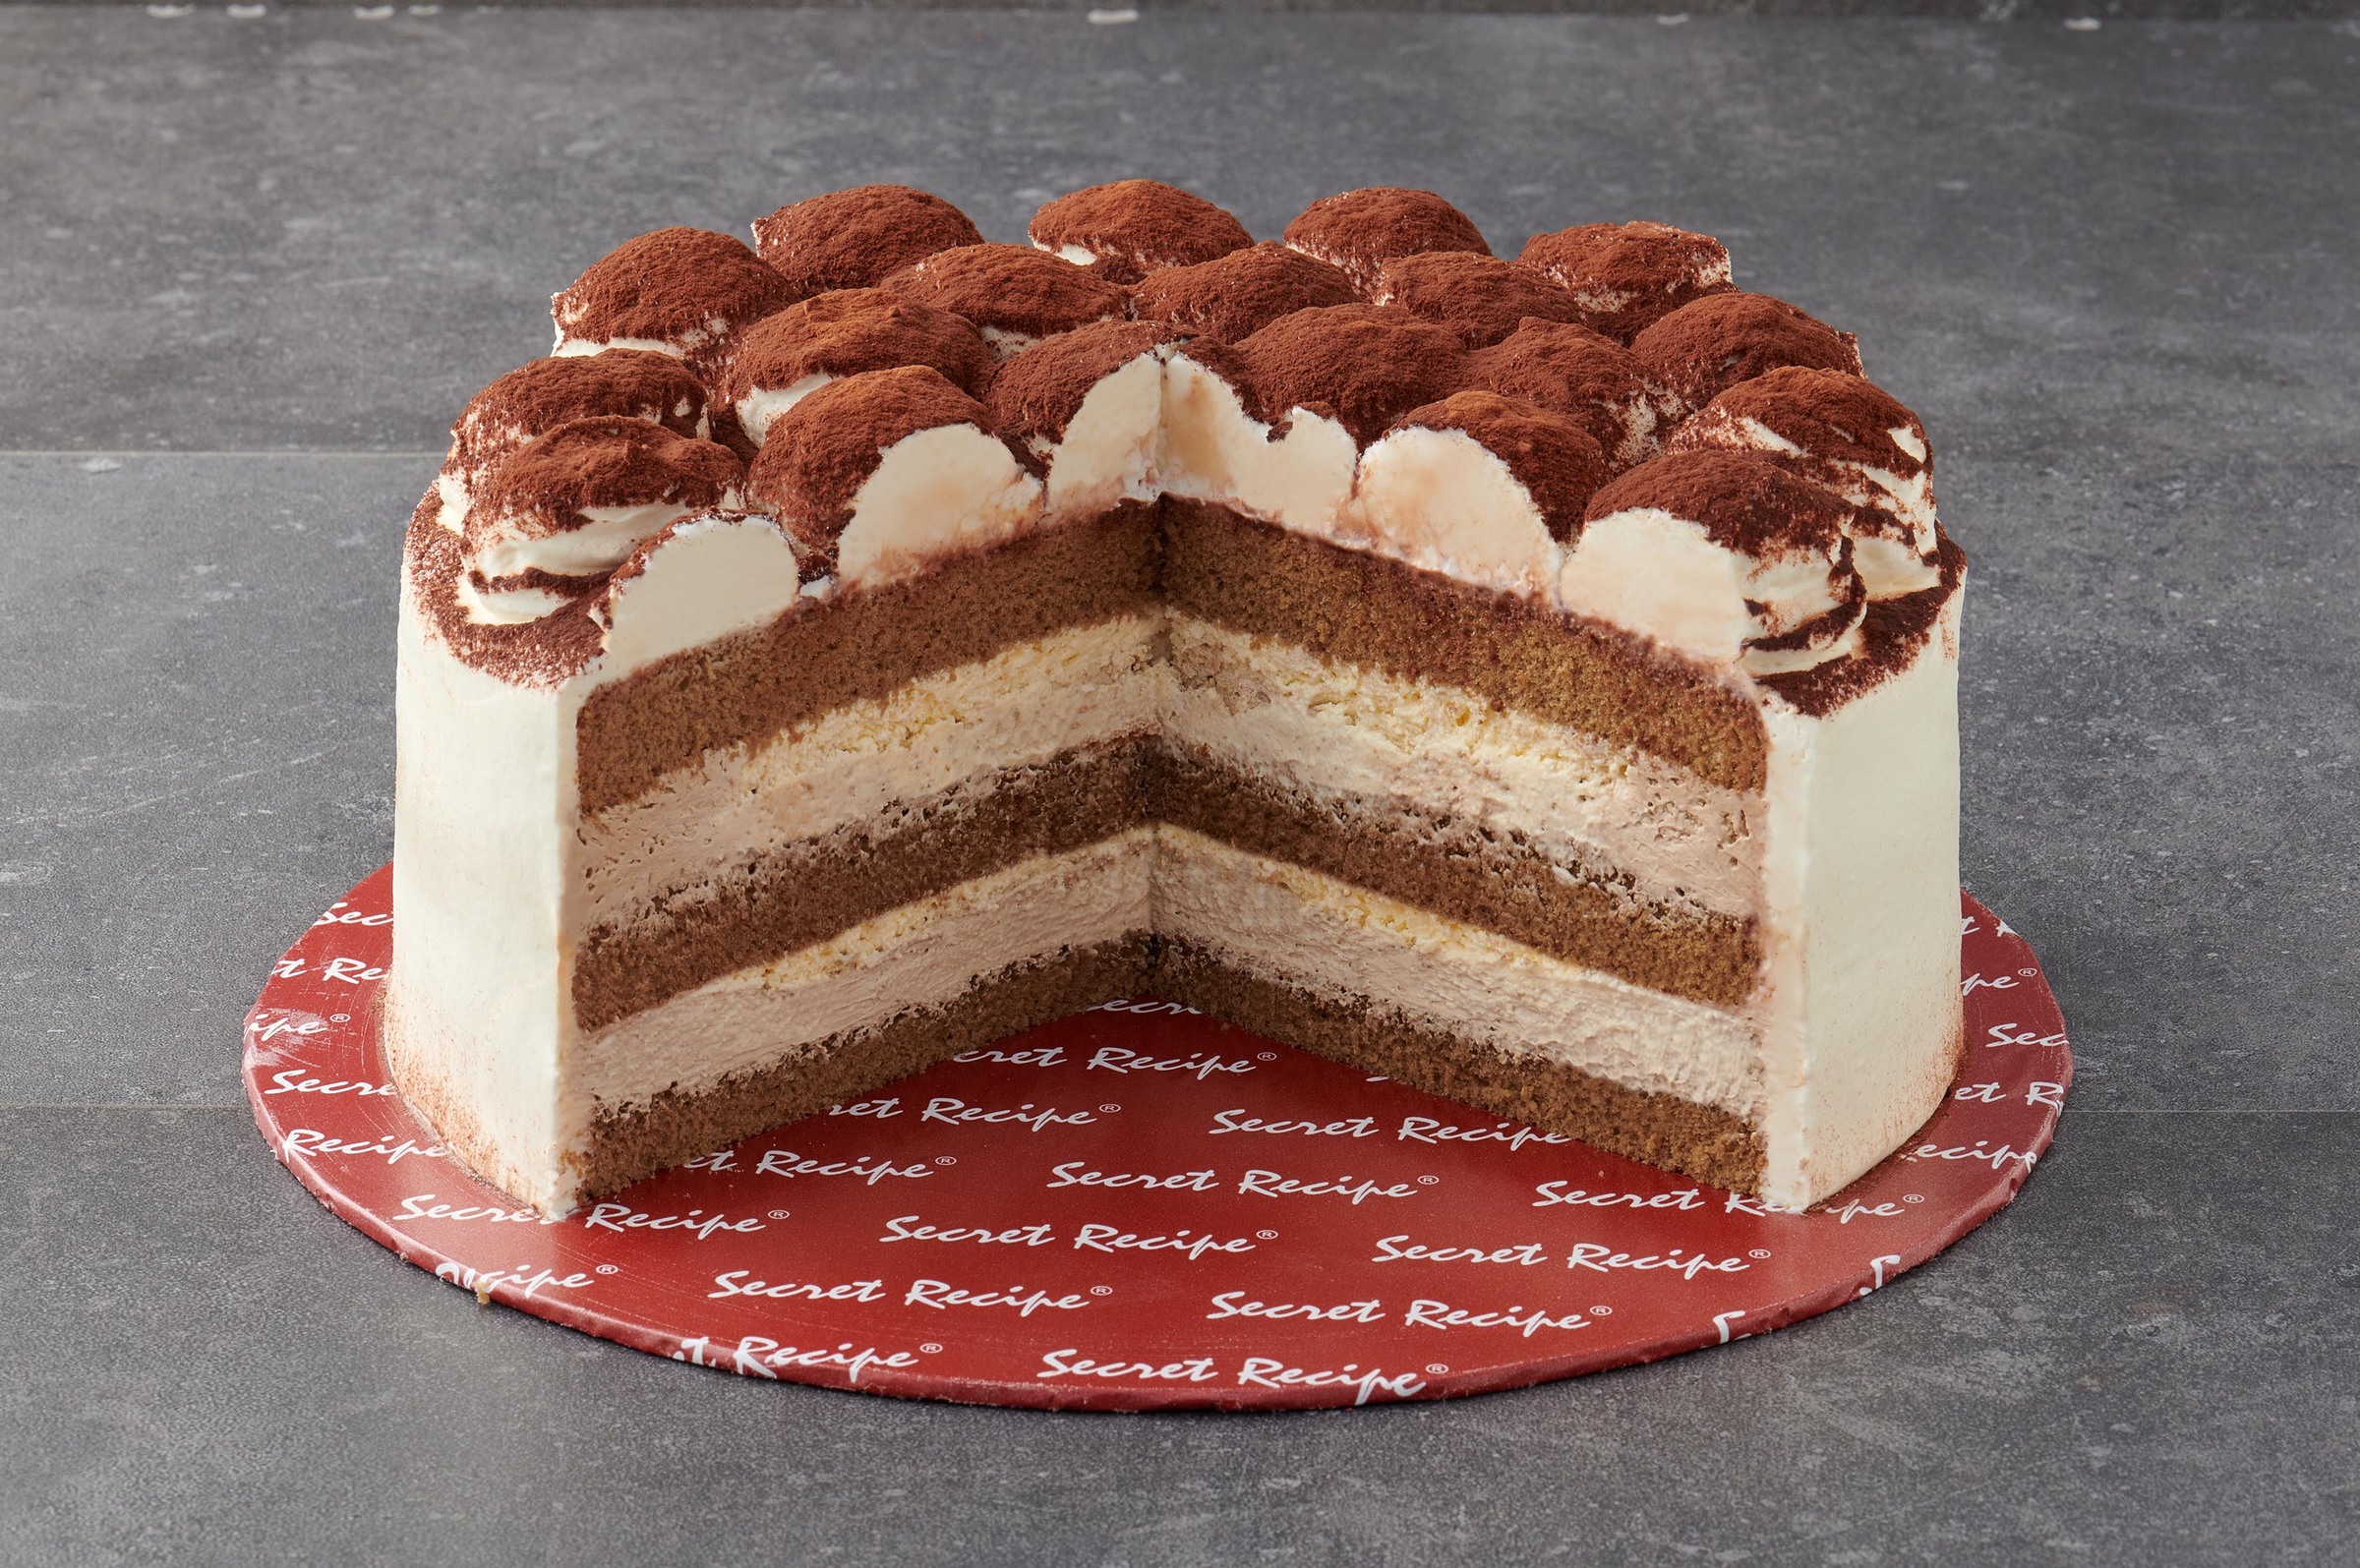 Send Online Tiramisu Cake To Your Loved Ones With Winni.in | Winni.in